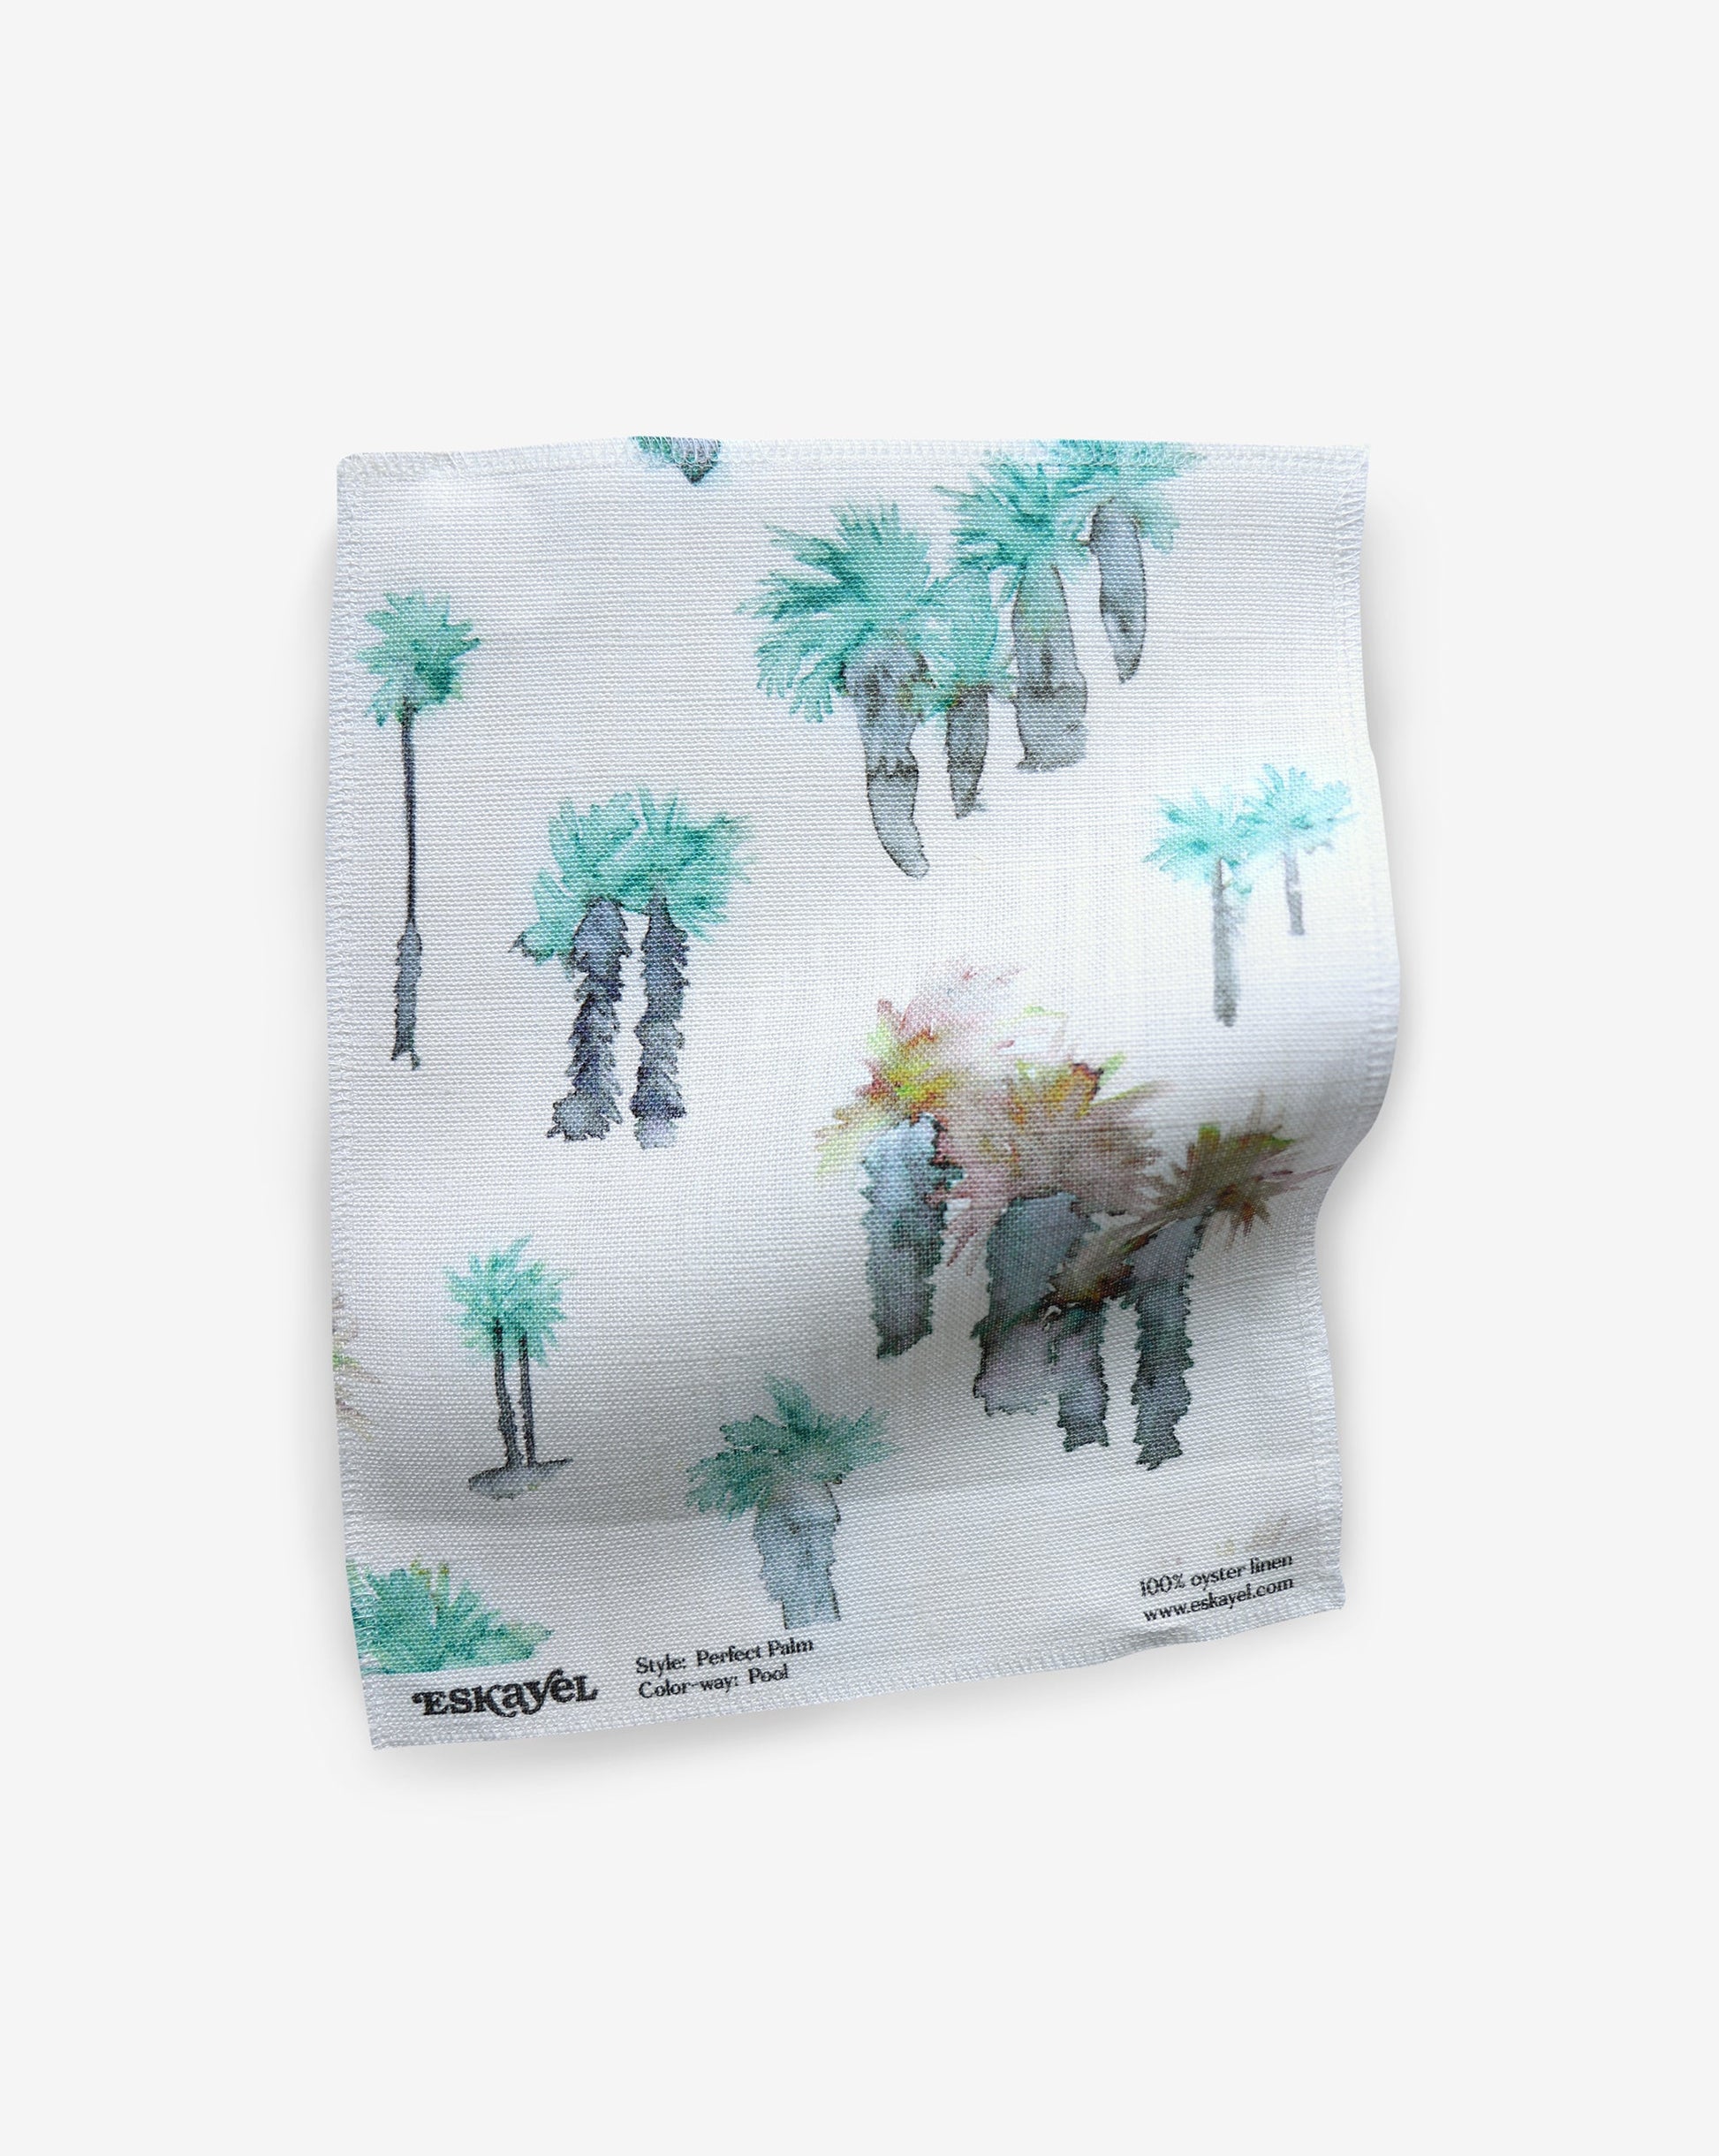 This Perfect Palm Fabric Pool has palm trees in a watercolor style